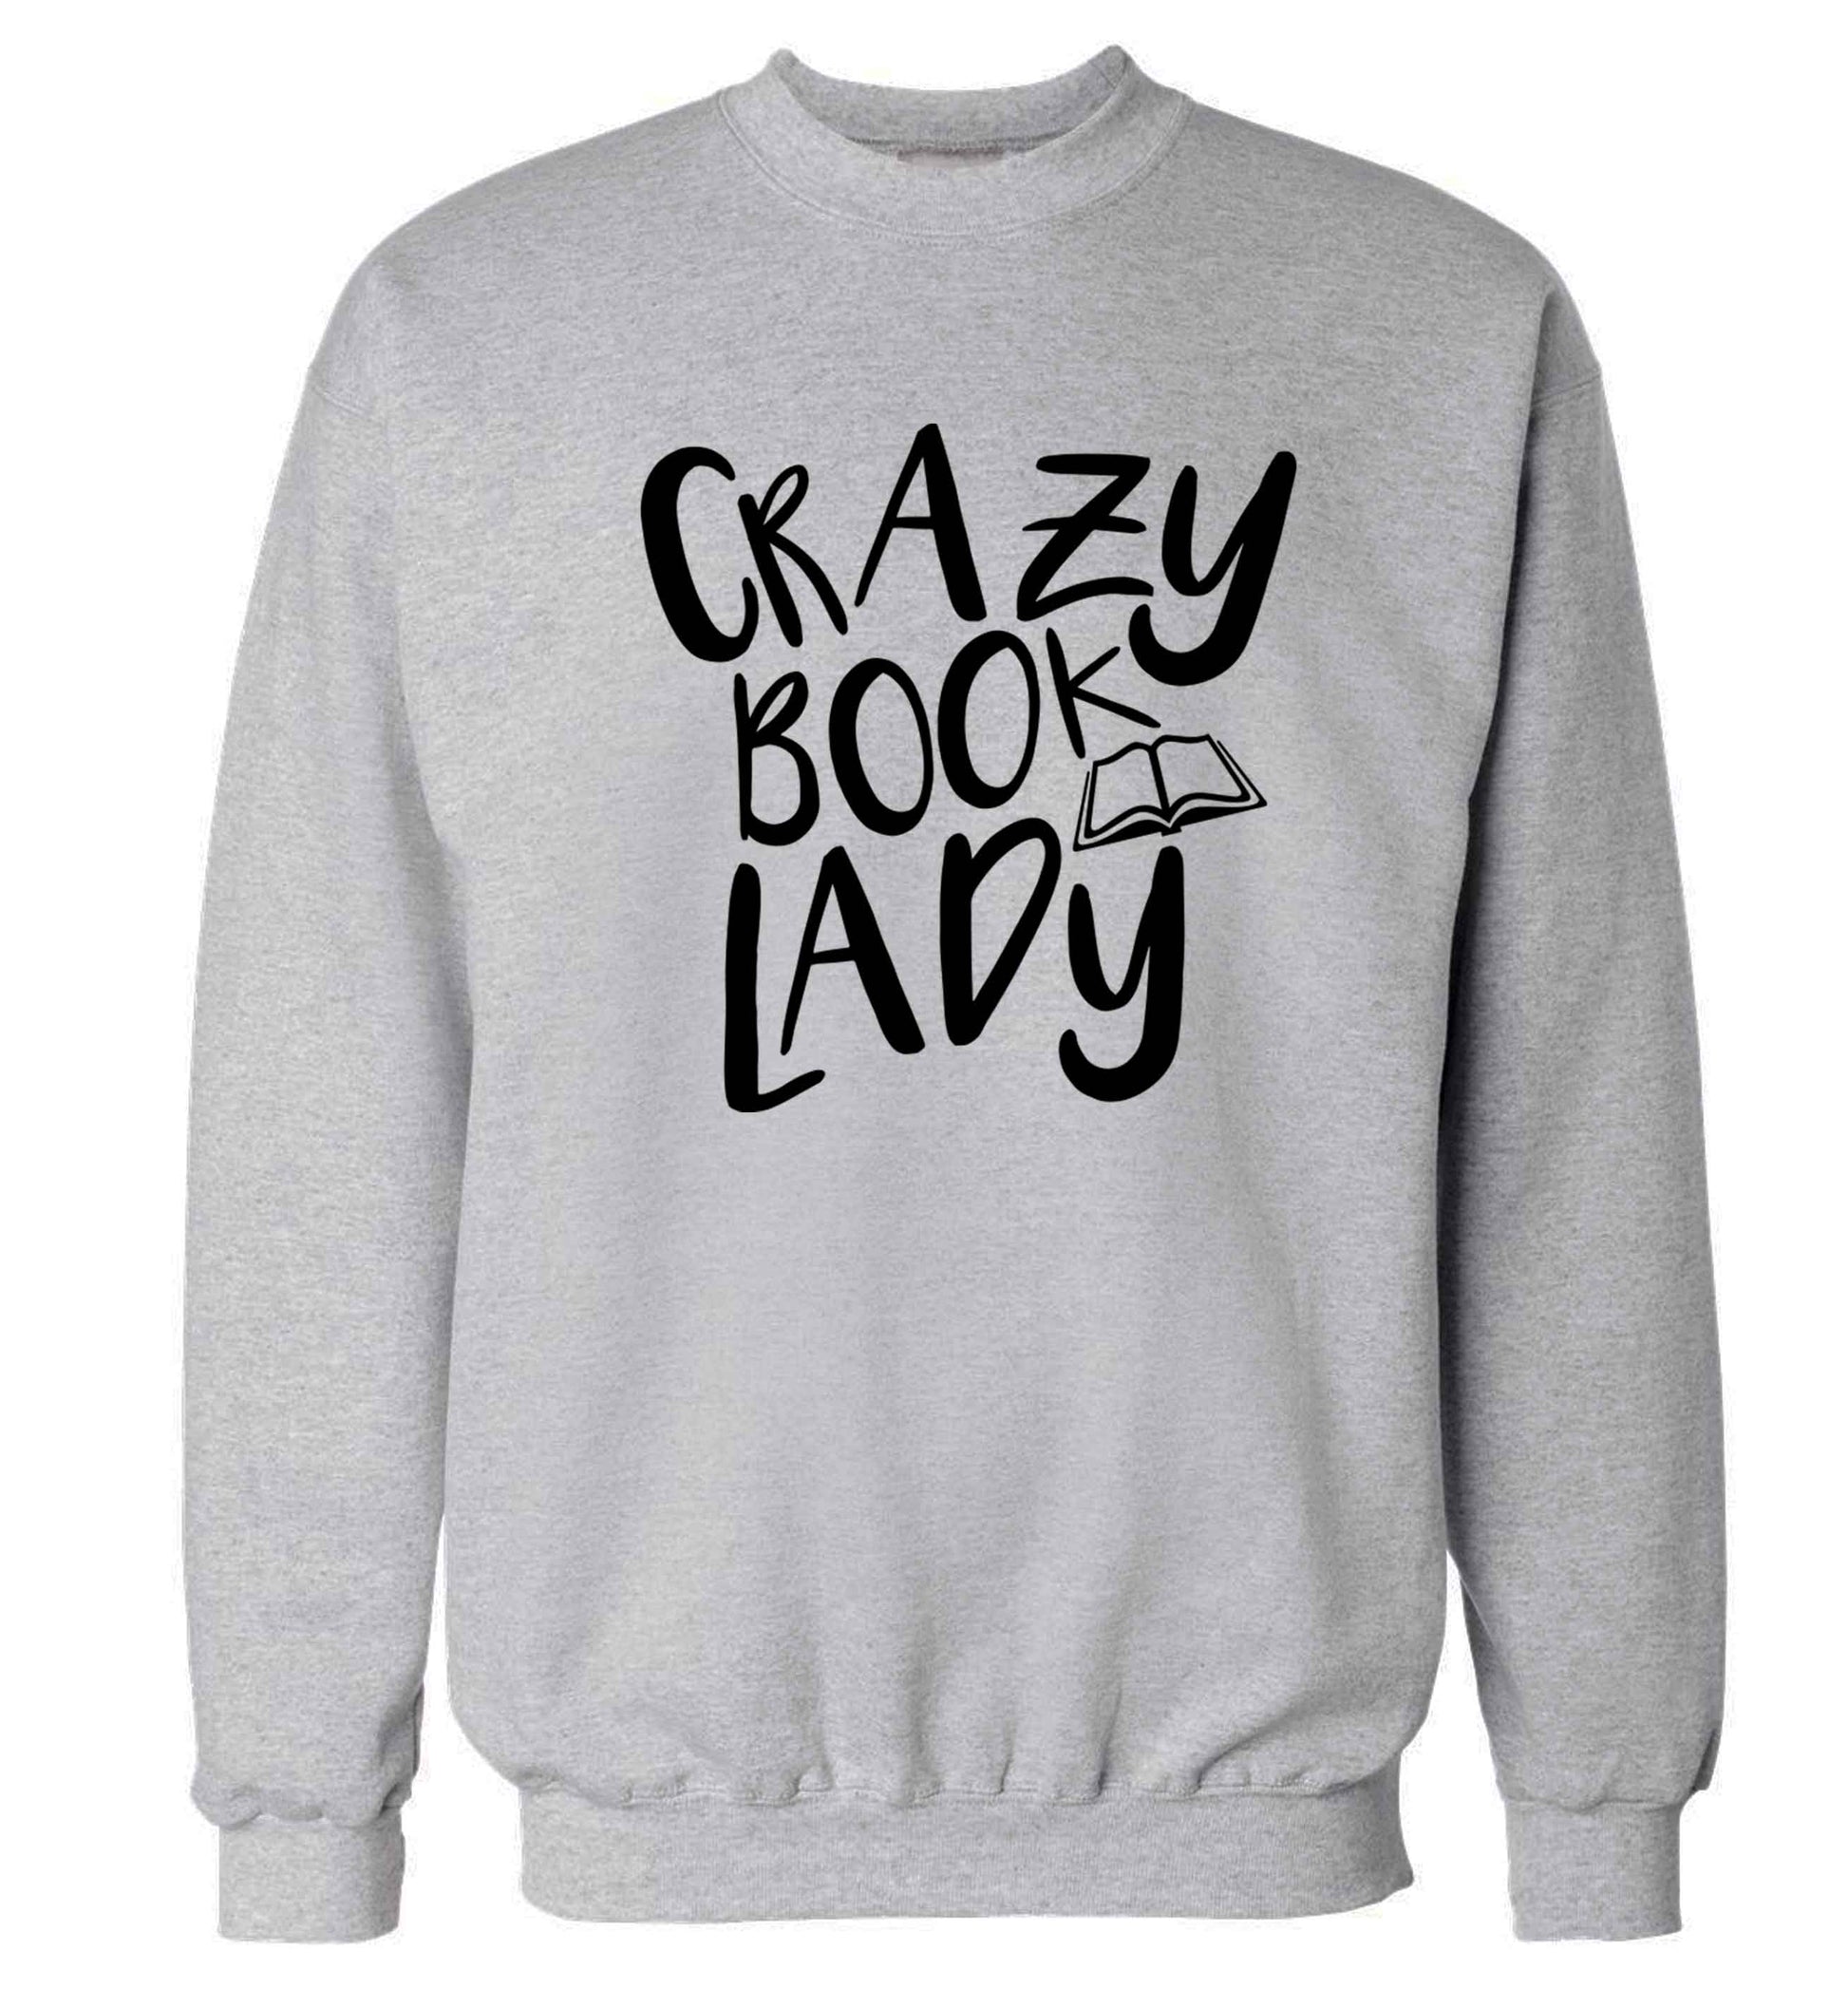 Crazy book lady Adult's unisex grey Sweater 2XL